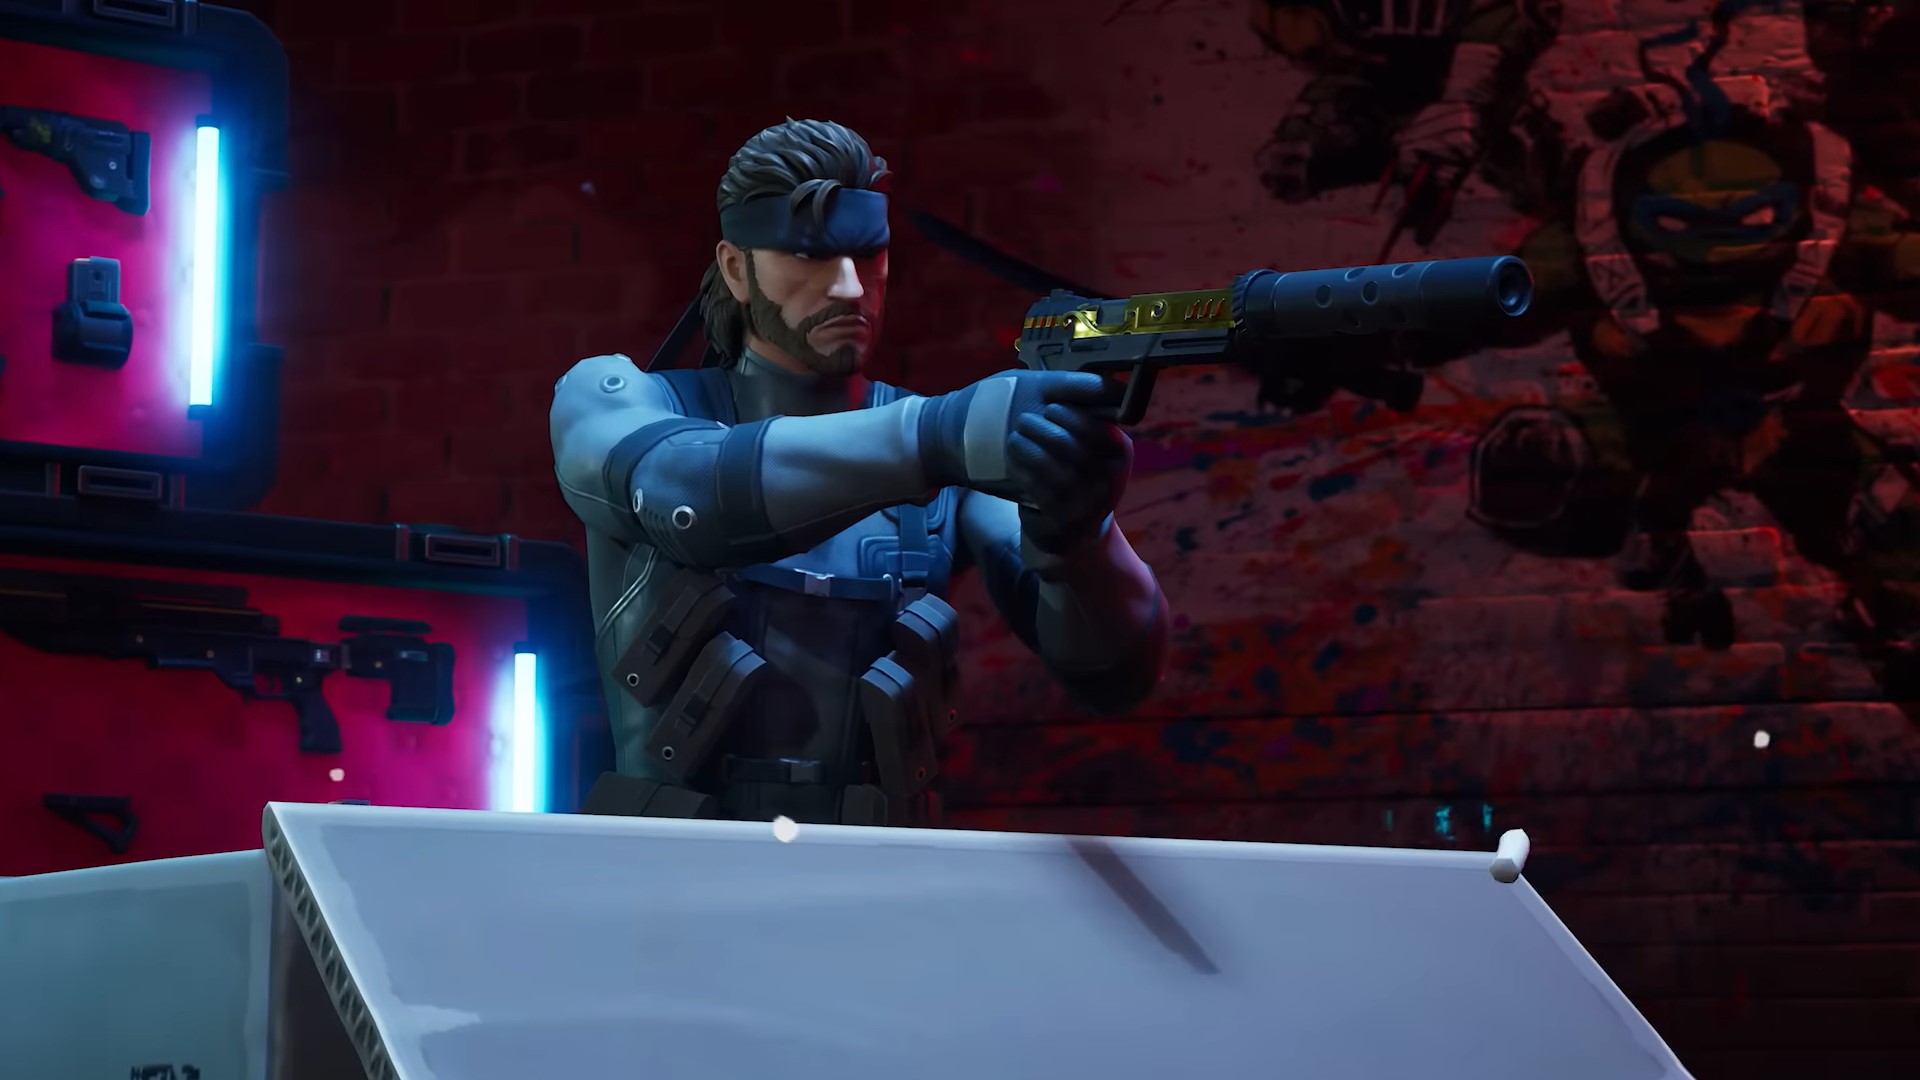 Fortnite Adds Solid Snake, Had Over 100 Million Players in November